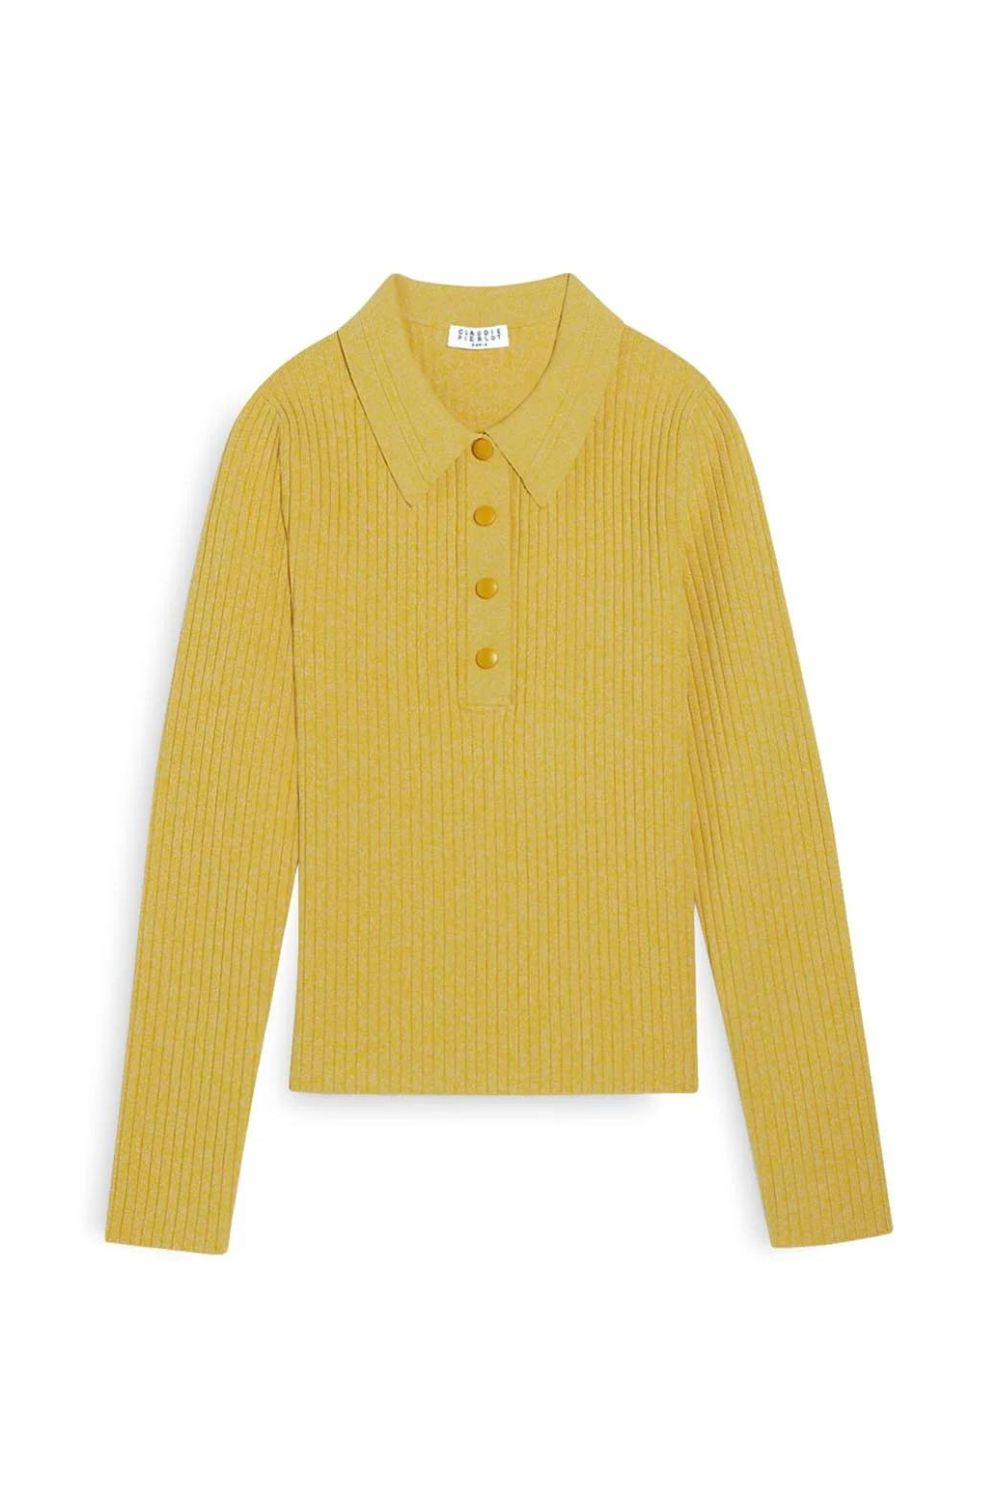 Our Autumn Uniform Comes From This Chic – And Discounted – French ...